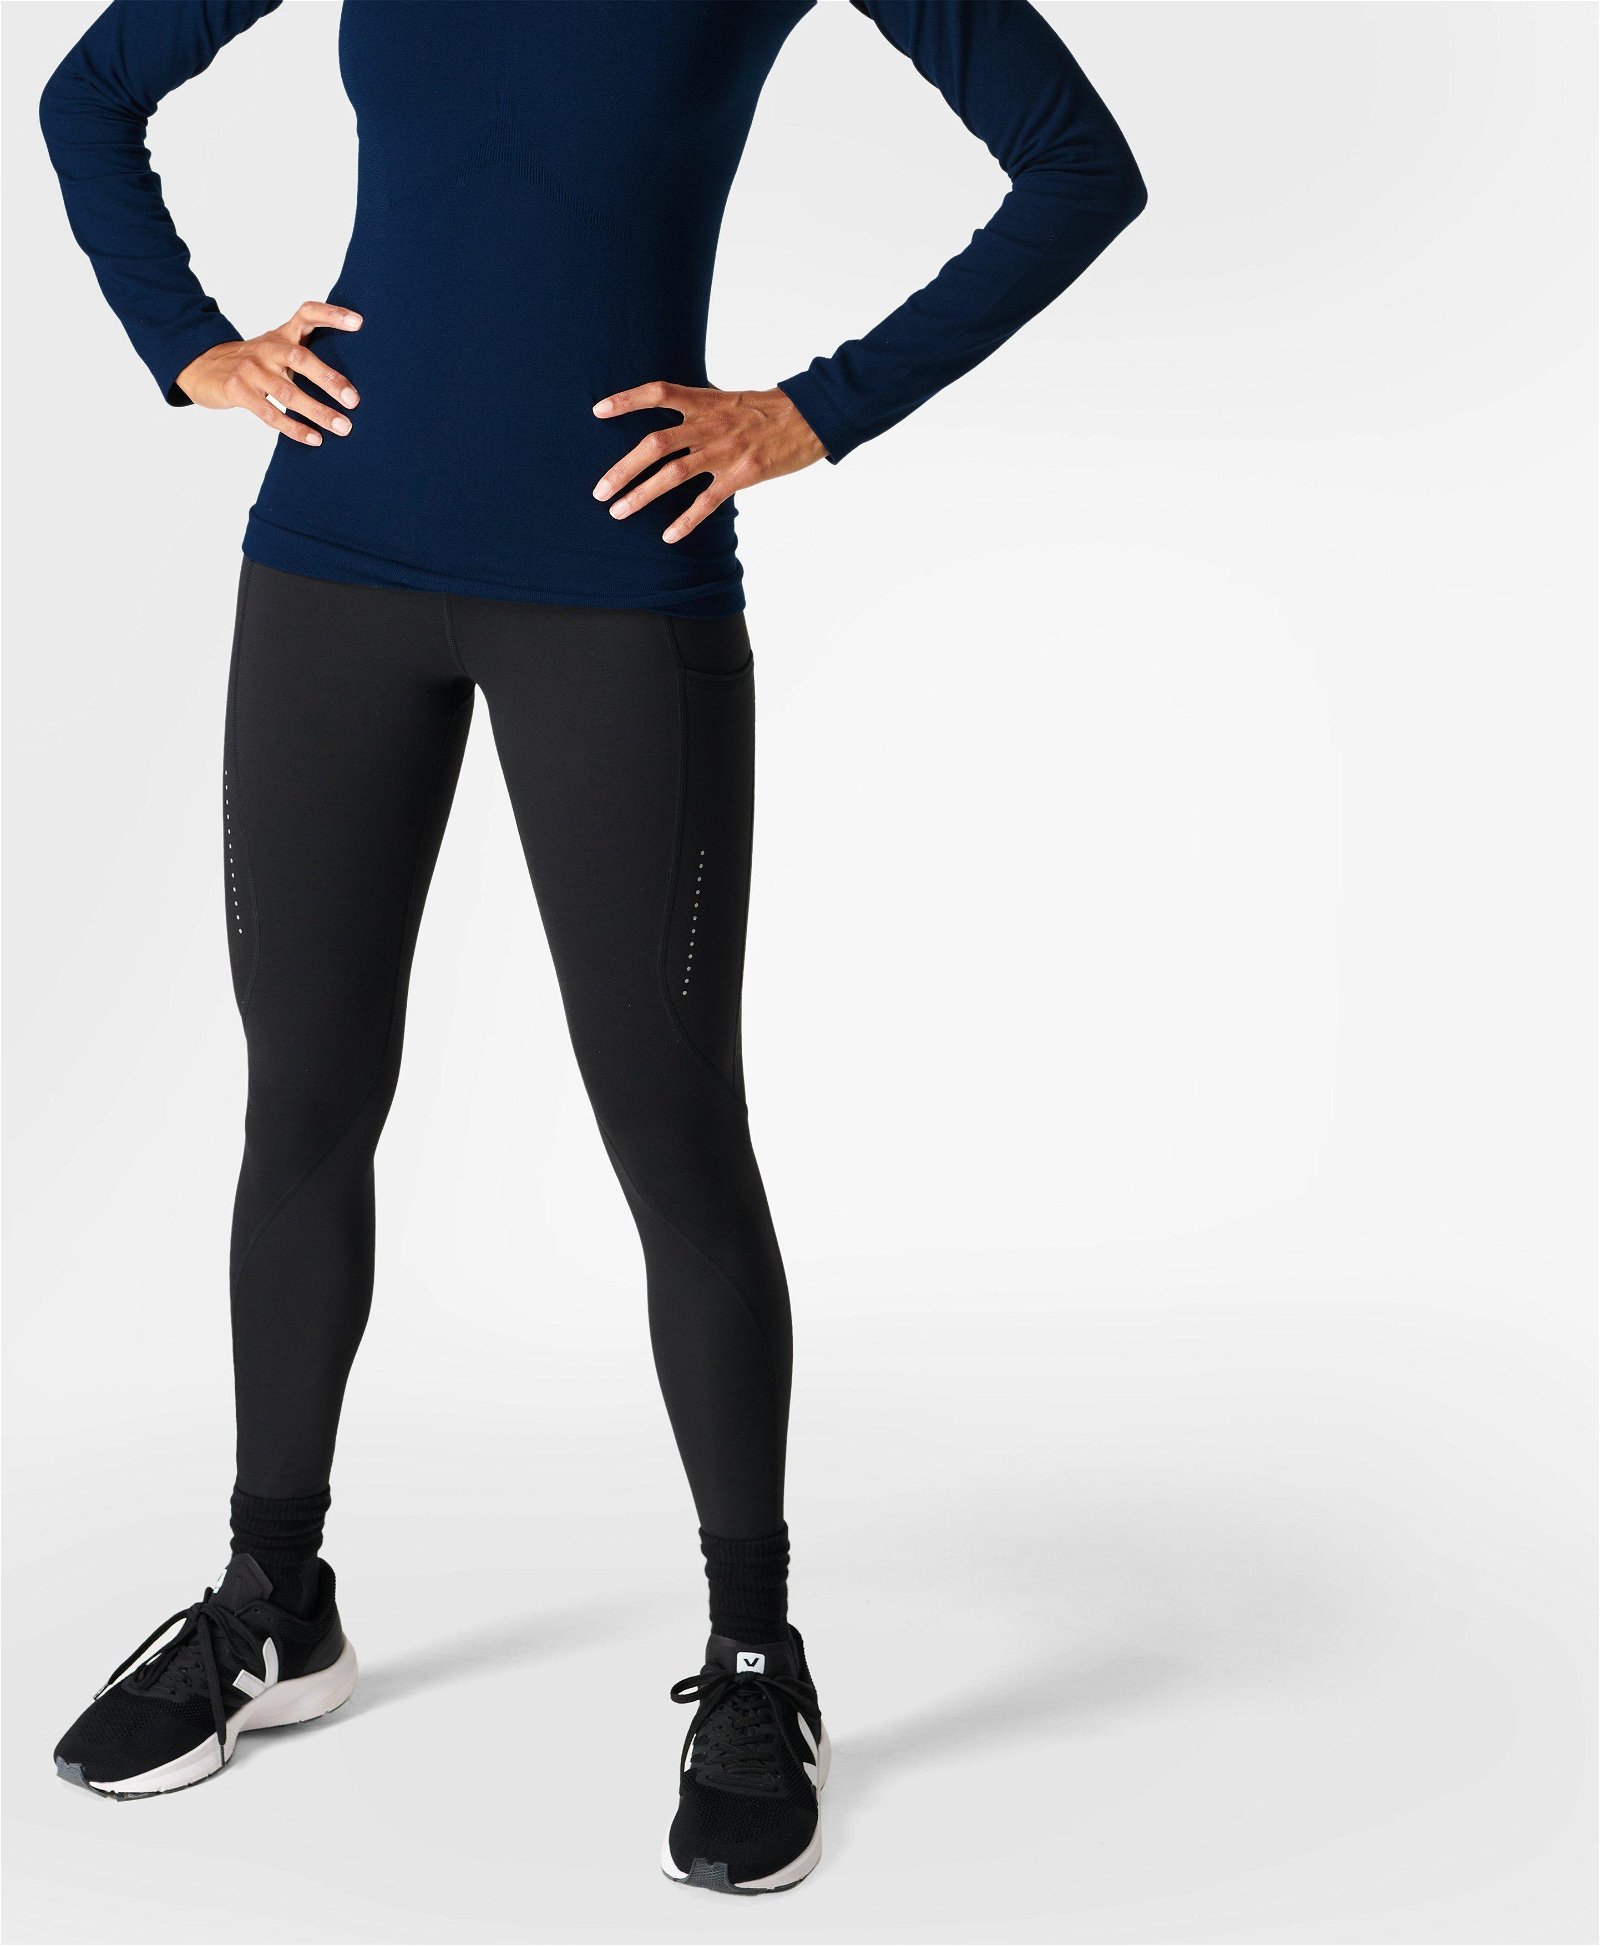 Sweaty Betty Review: Thermal Run Leggings and Glisten LS - Agent Athletica